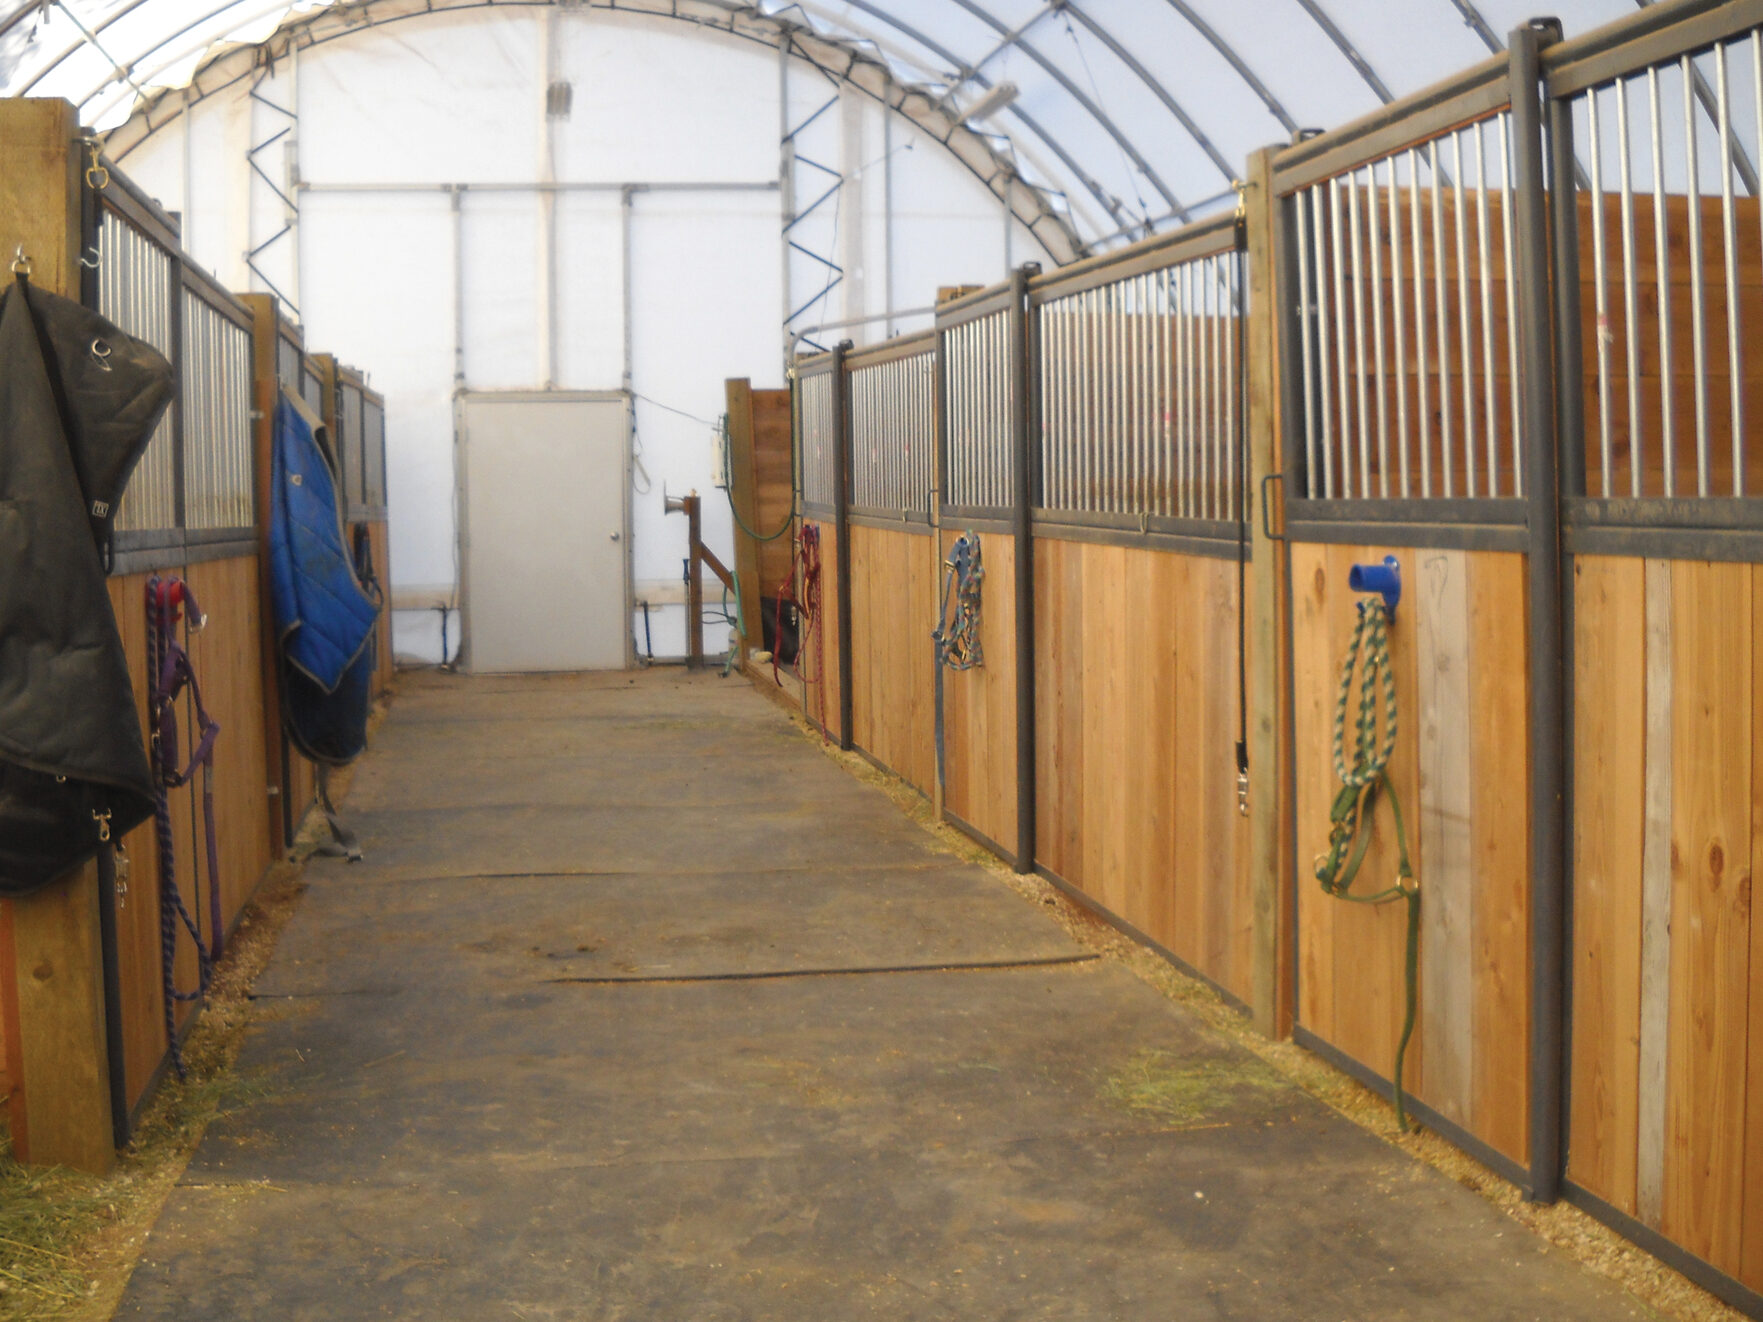 wooden horse stalls inside a fabric building